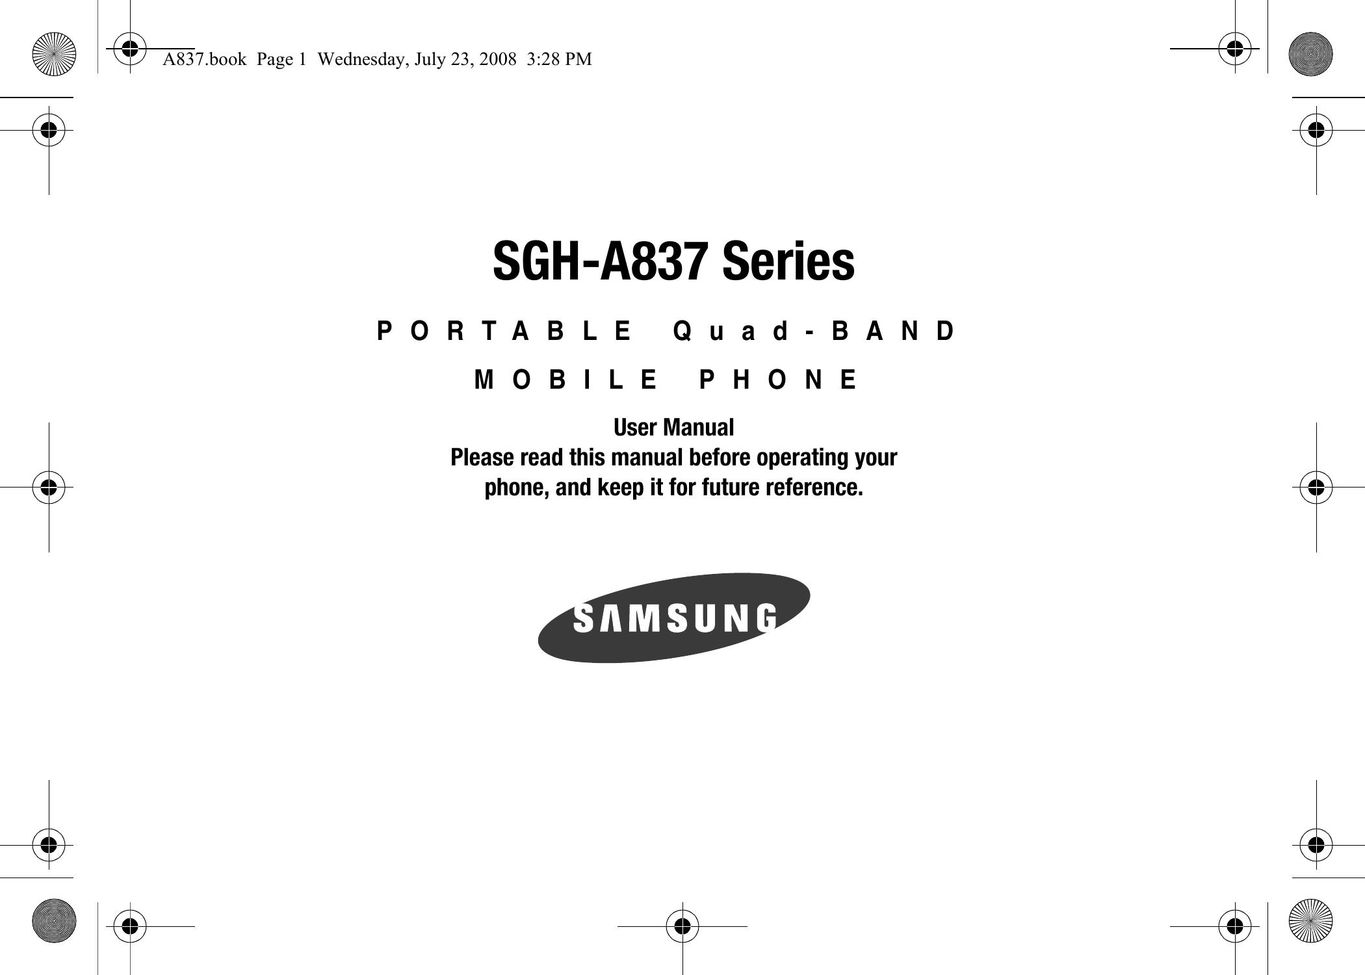 AT&T A837 Rugby Cell Phone User Manual